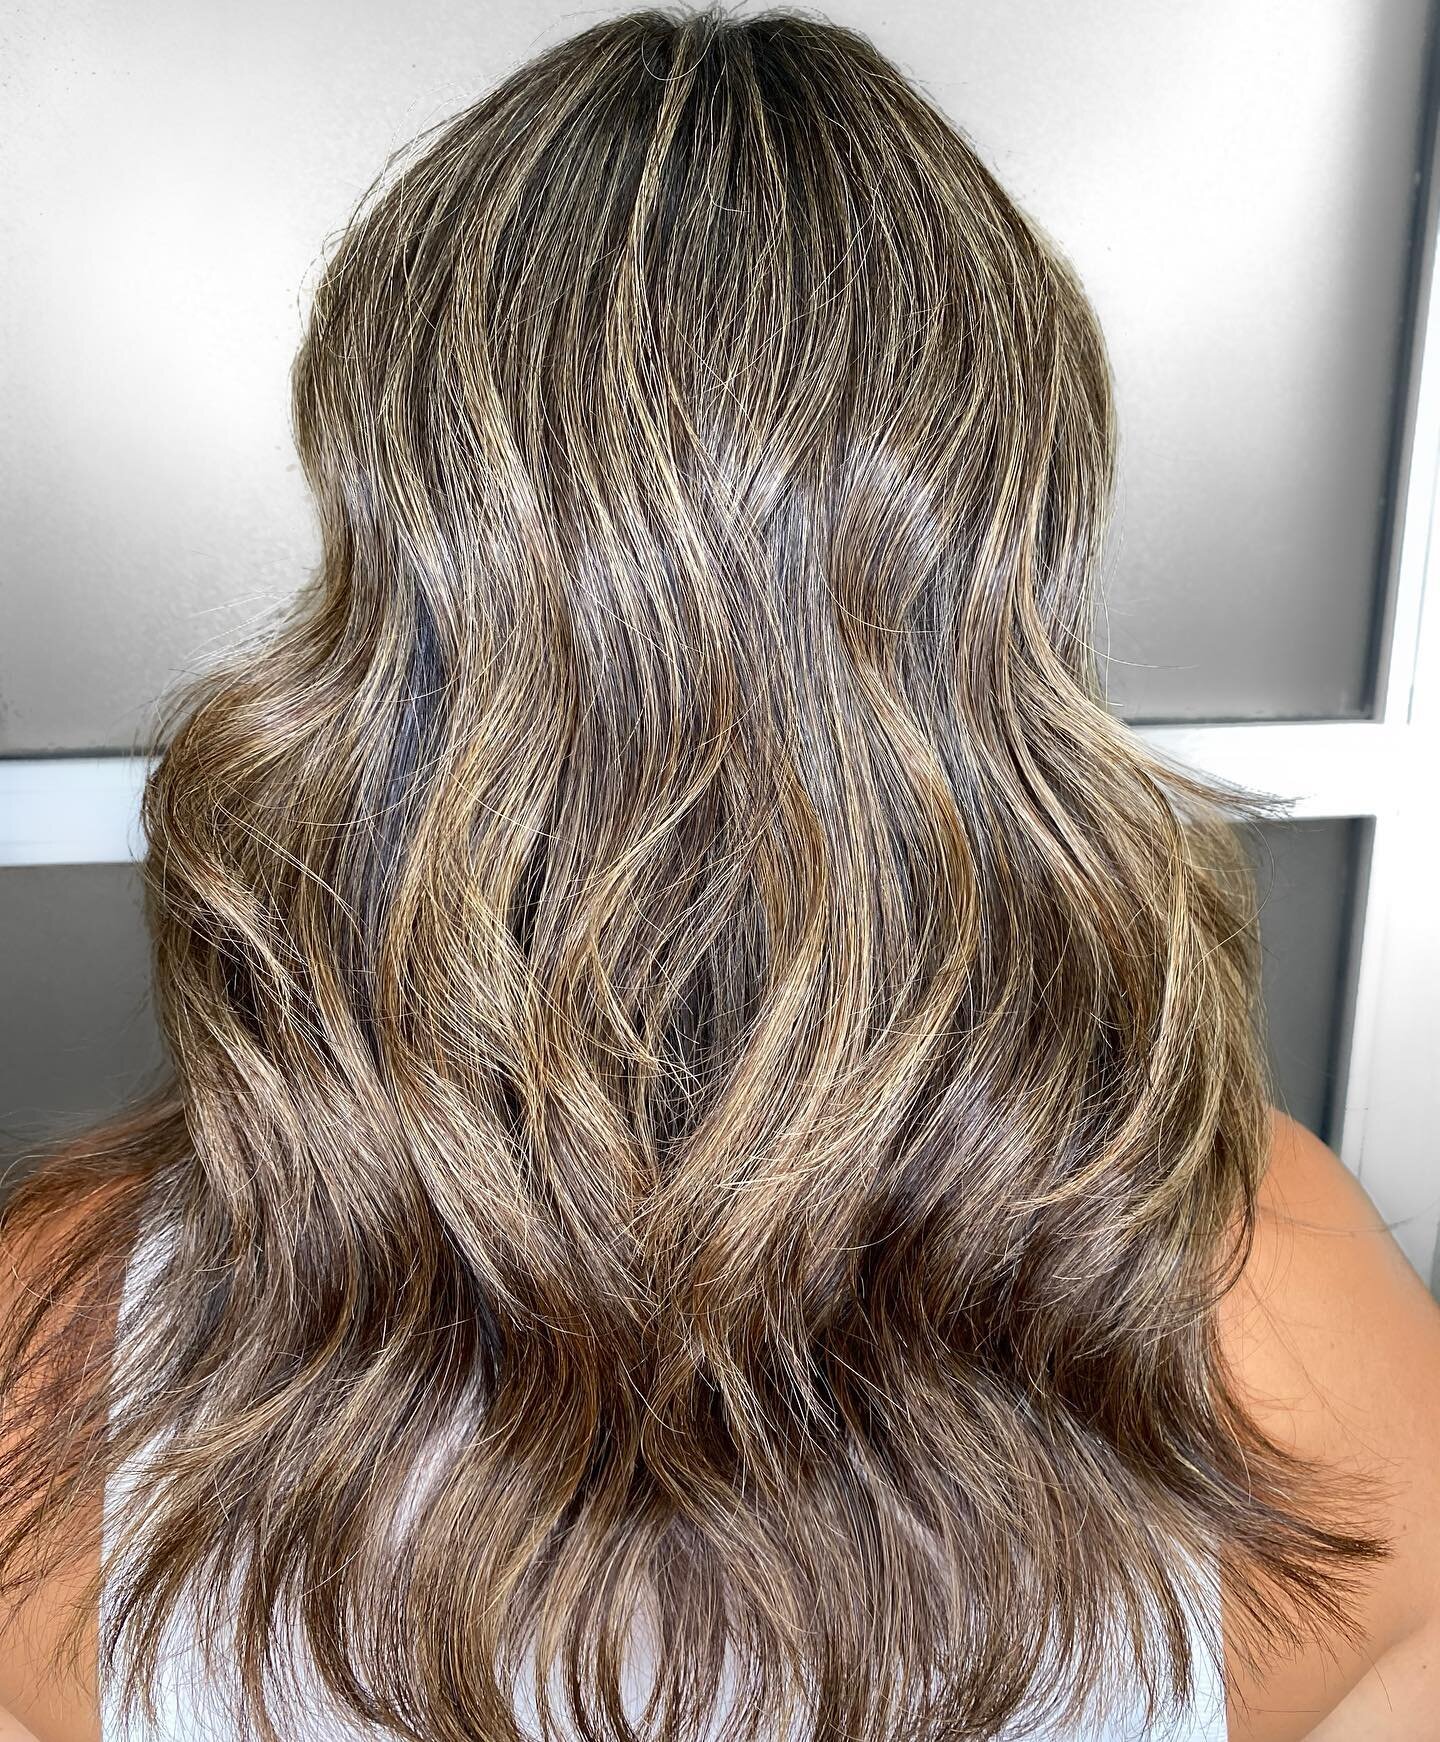 ✨E V A ✨nothing but love for this babe❤️ #HairByAmanduhh @havensalonny ⠀
&bull;⠀
⠀
&bull;⠀
⠀
&bull;⠀
⠀
&bull;⠀
⠀
&bull;
⠀
&bull;⠀
#modernsalon #longislandny #saloneducation #behindthechair #hair #salonlife #beauty #hairstyle #haircolorists #haircolor